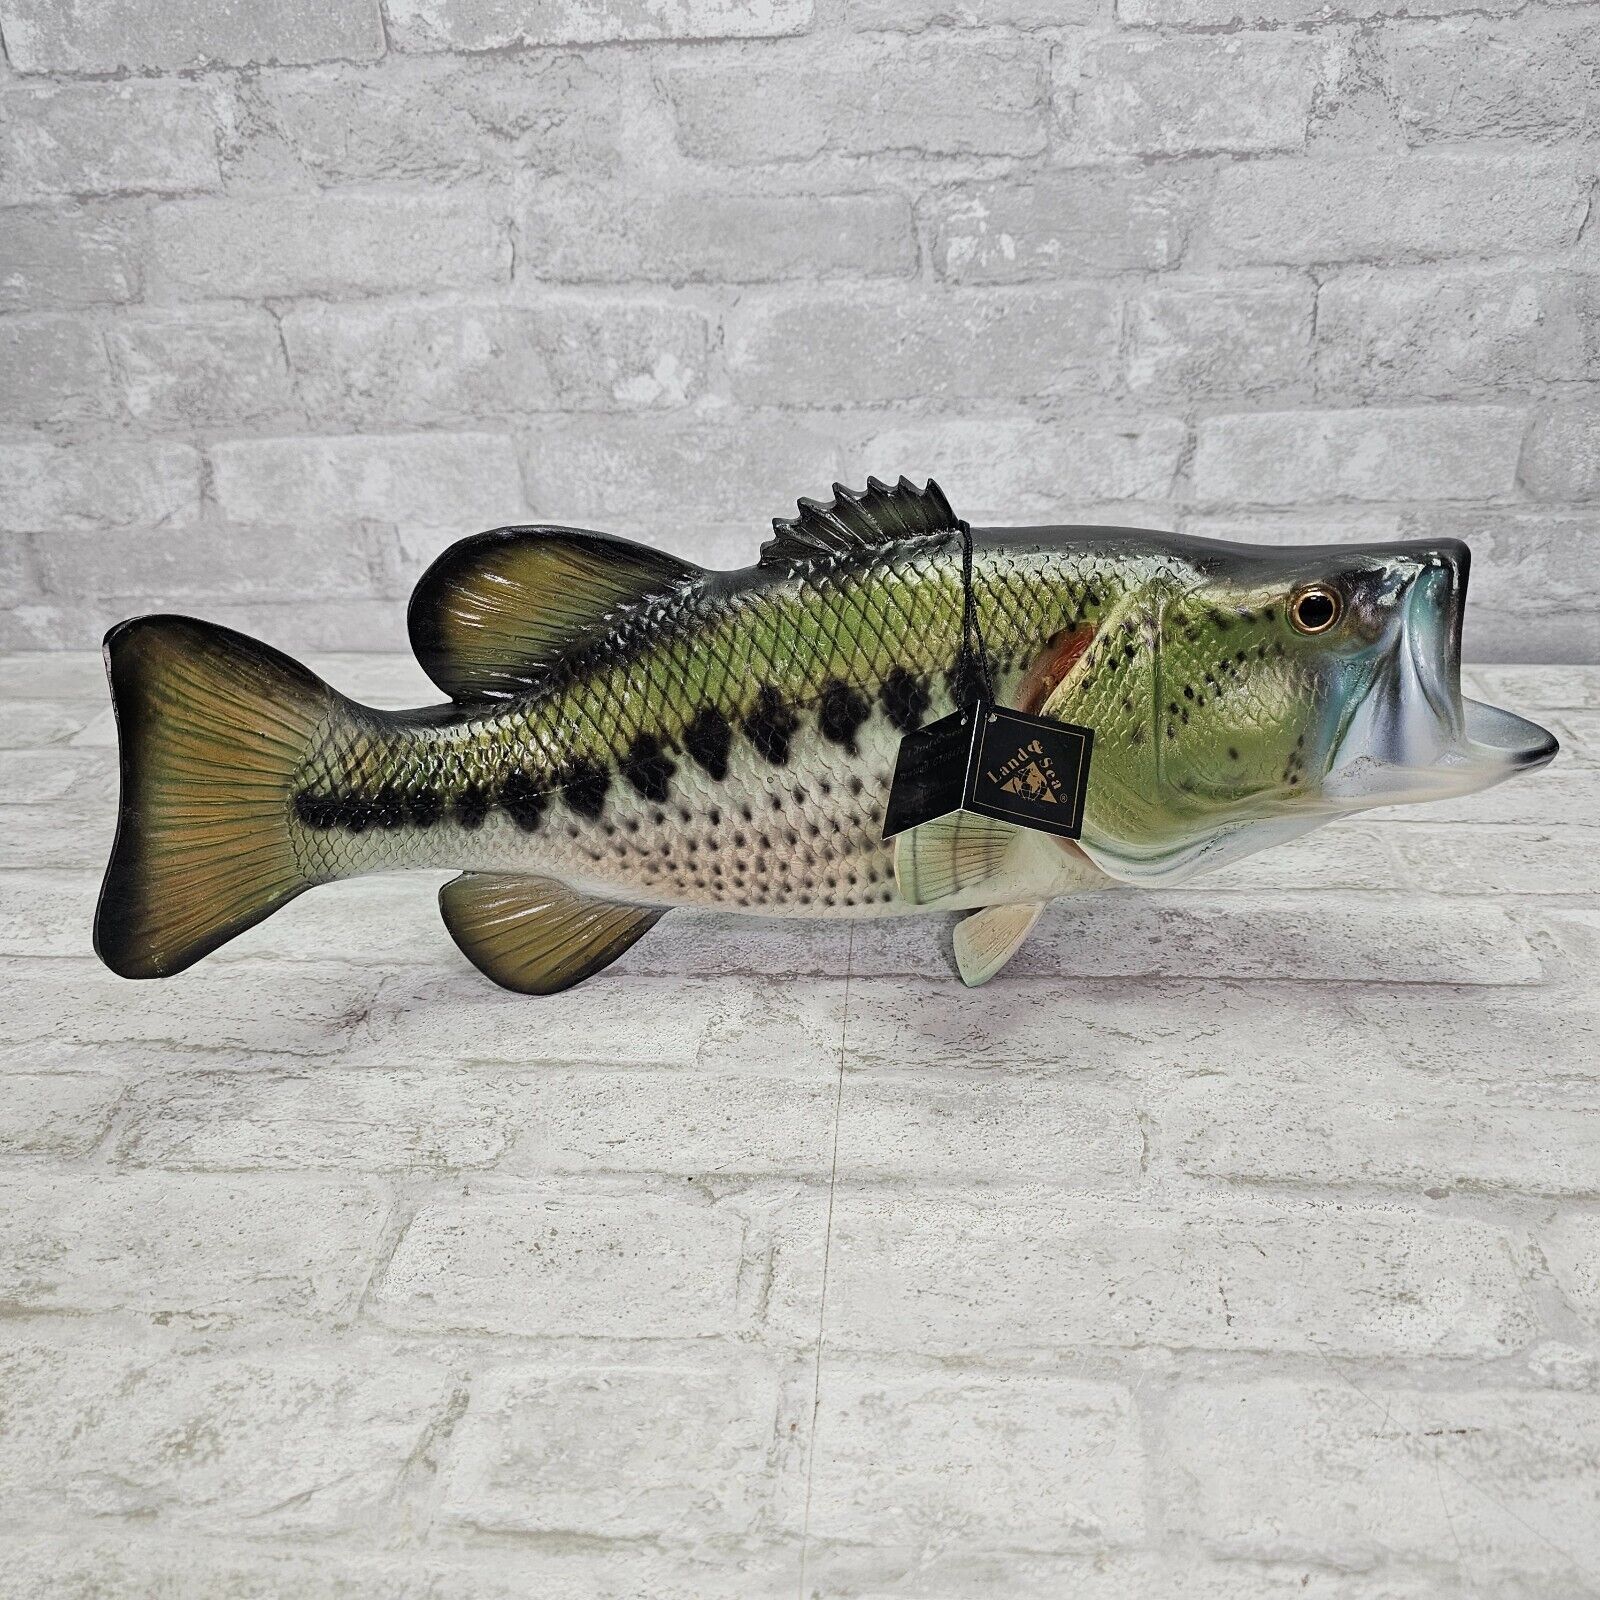 Land & Sea Collectibles Nature Series Large Mouth Bass Sculpture Figurine 18 in.